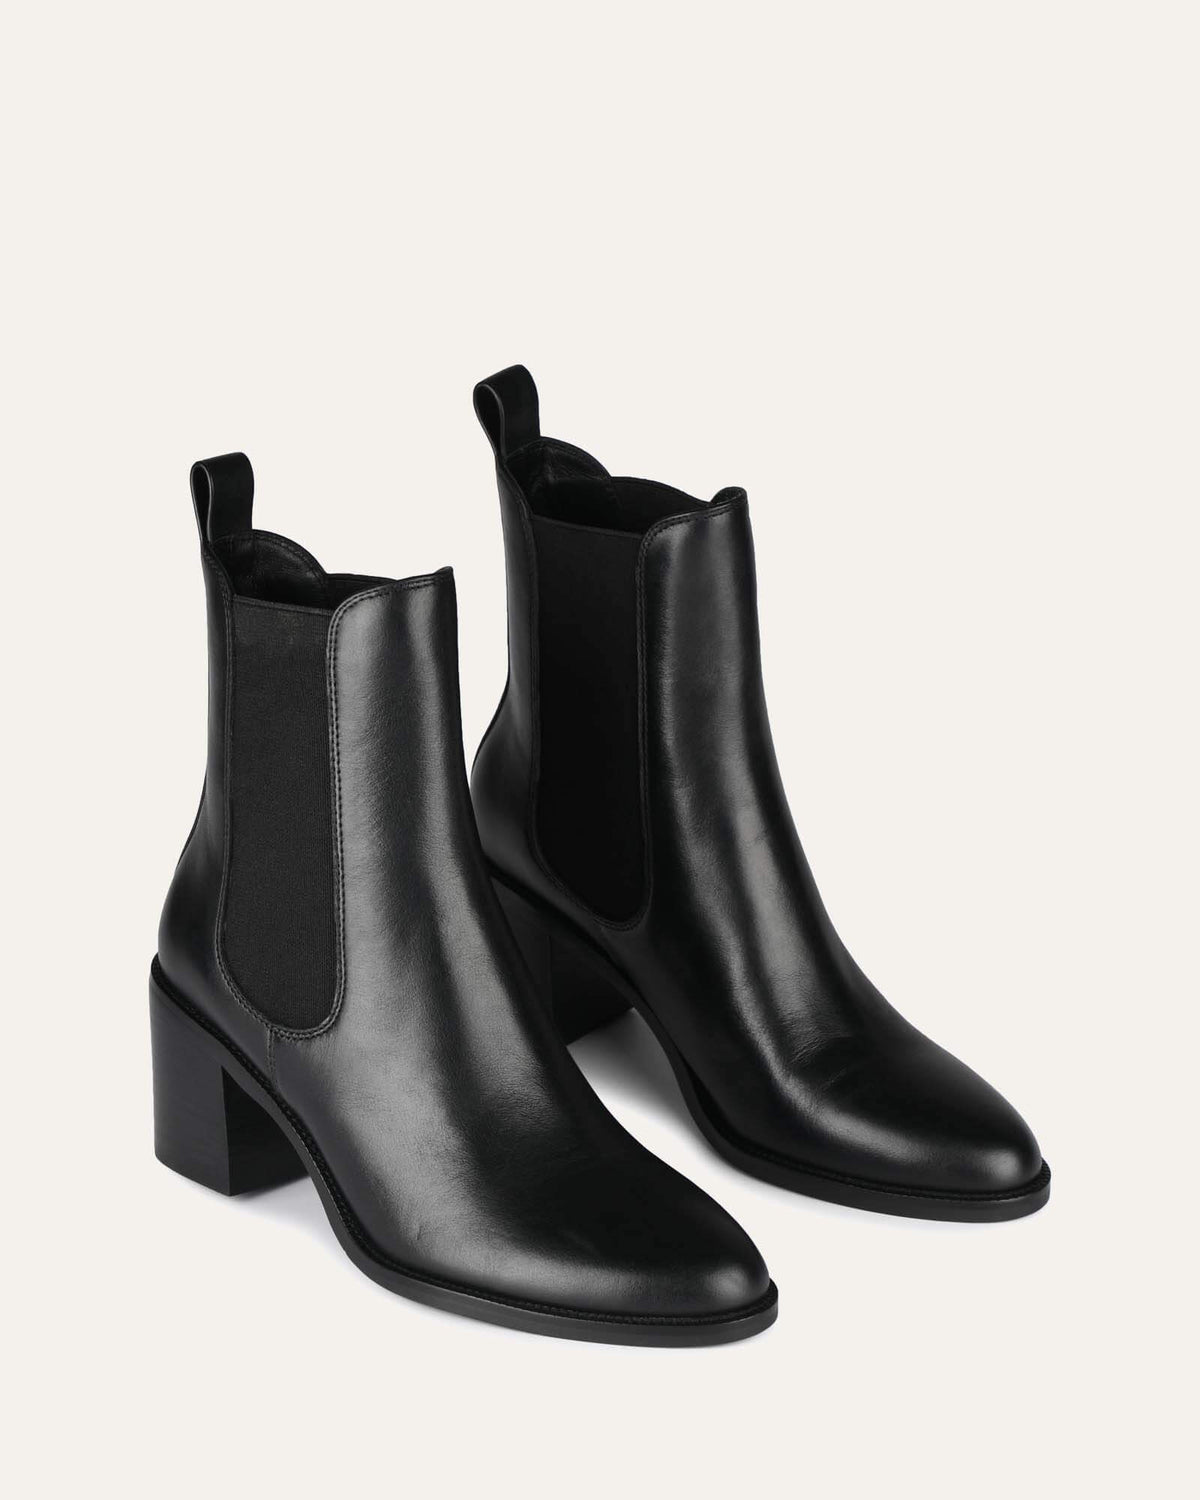 MARLOWE MID ANKLE BOOTS BLACK LEATHER